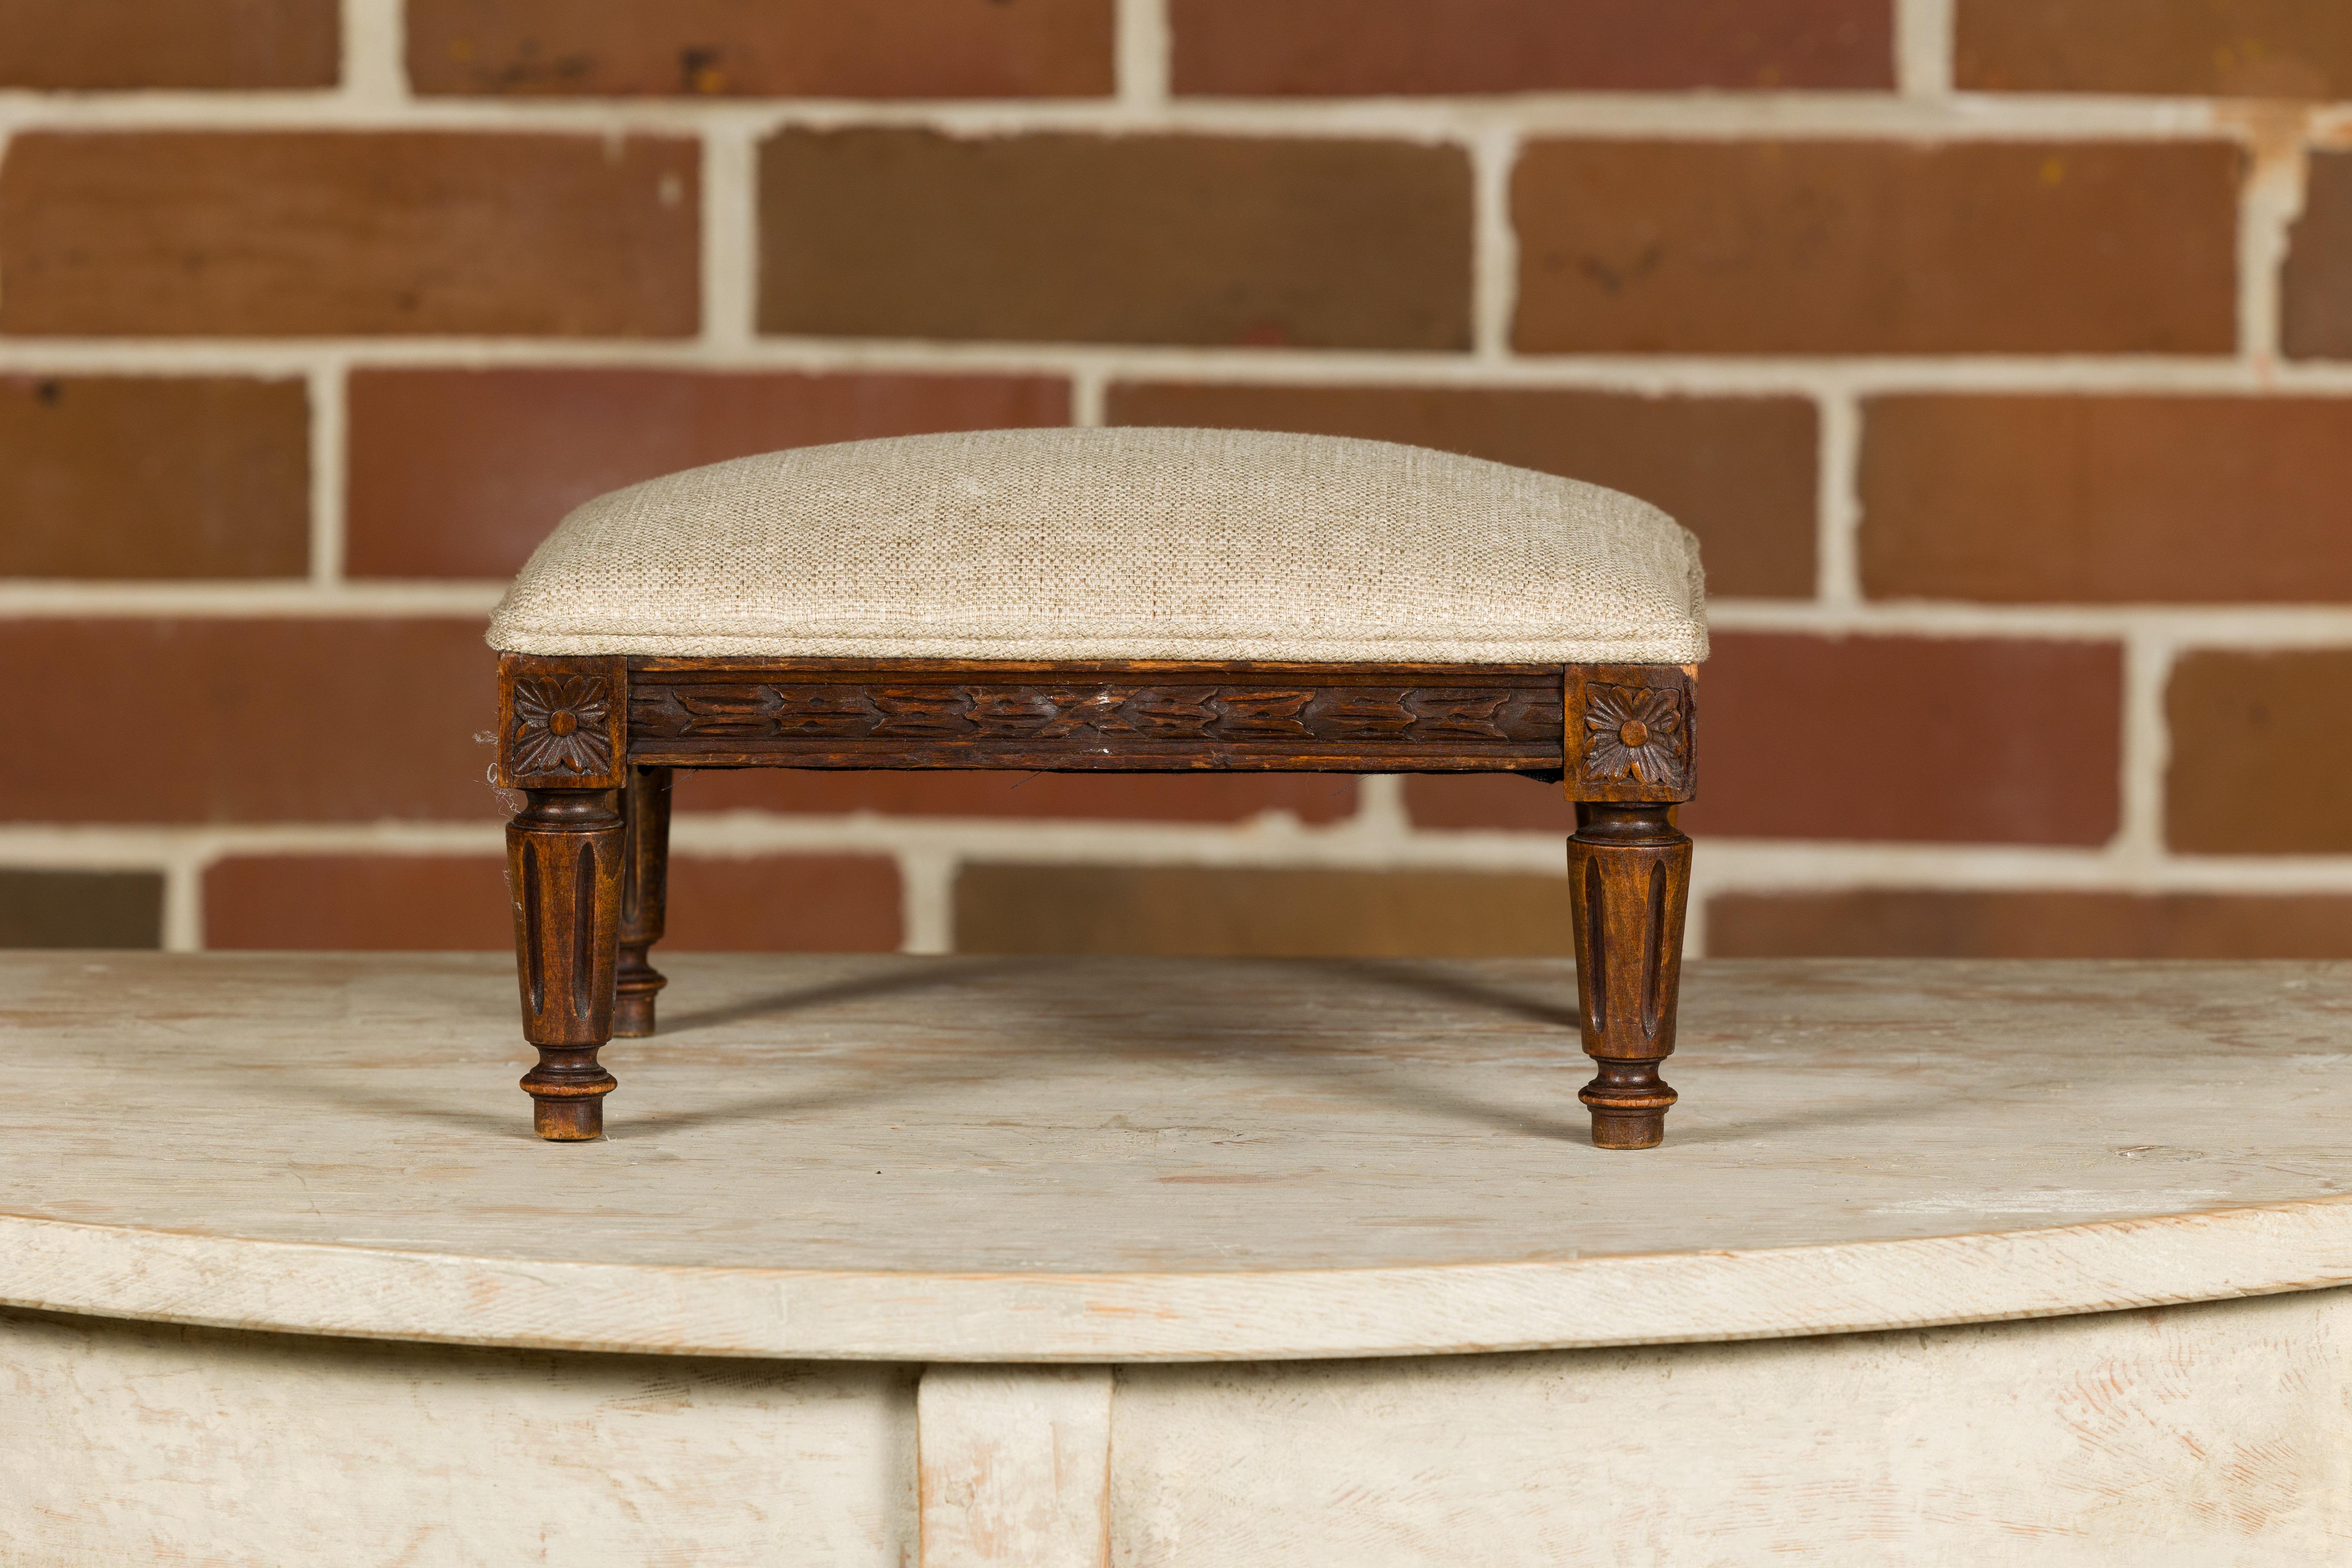 French Louis XVI Style 19th Century Footstool with Carved Décor and Fluted Legs For Sale 3